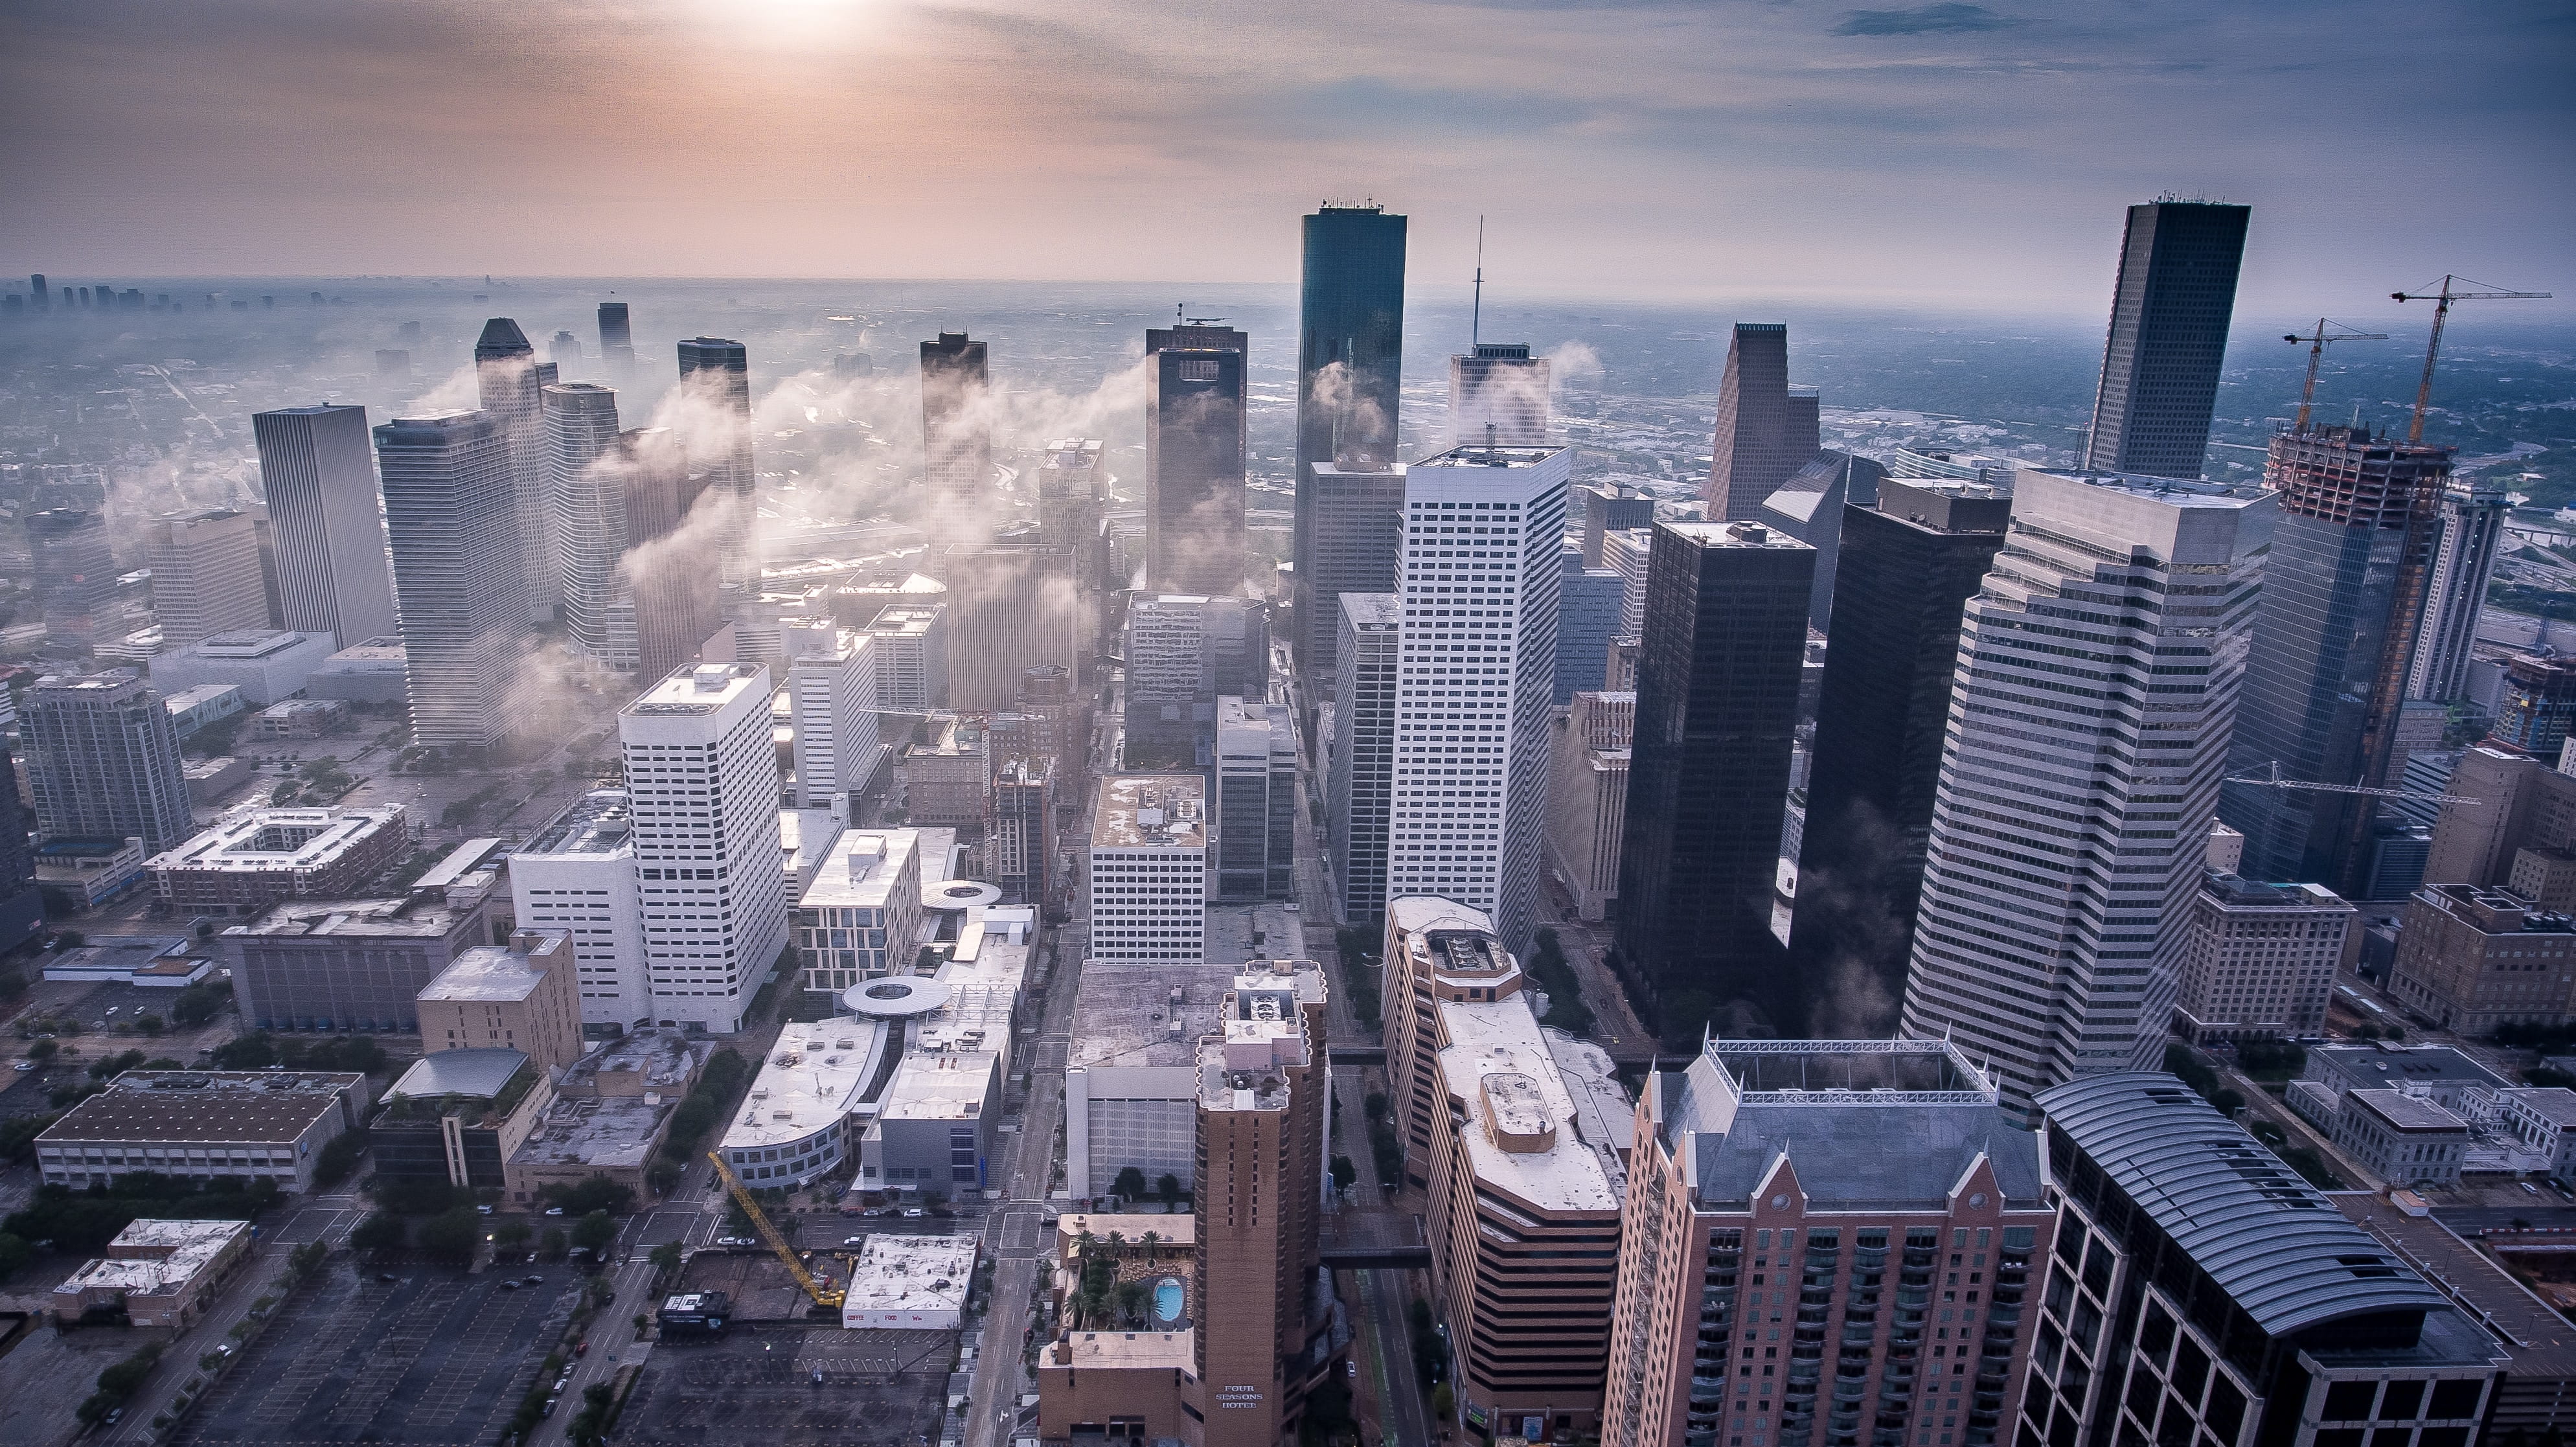 Skyline over business district | Commercial Journal